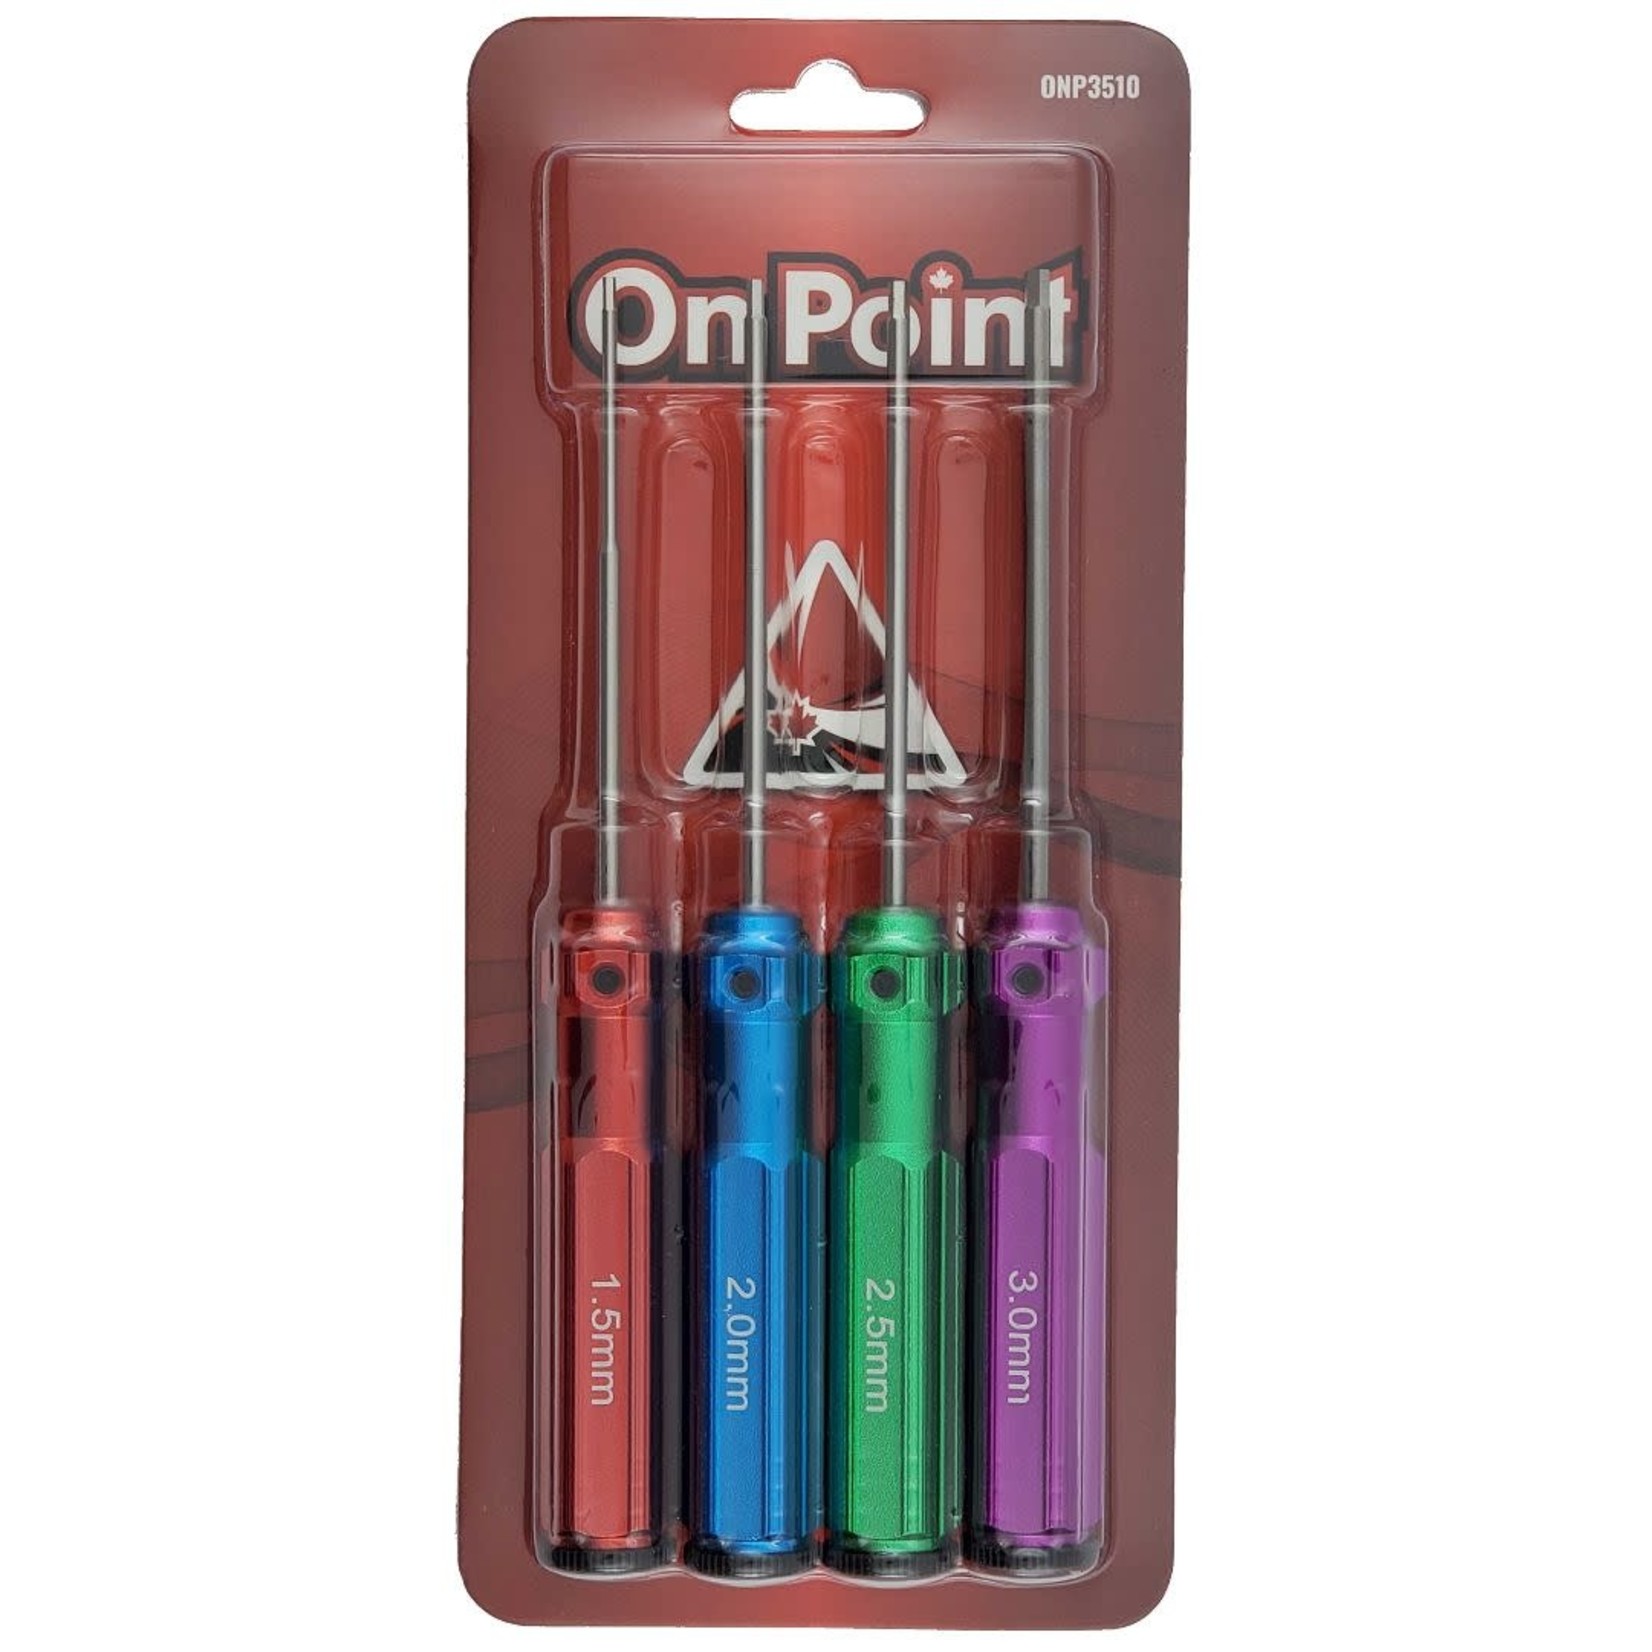 On Point Hex Screwdrivers (4) 1.5, 2.0, 2.5, 3.0mm Multi colour